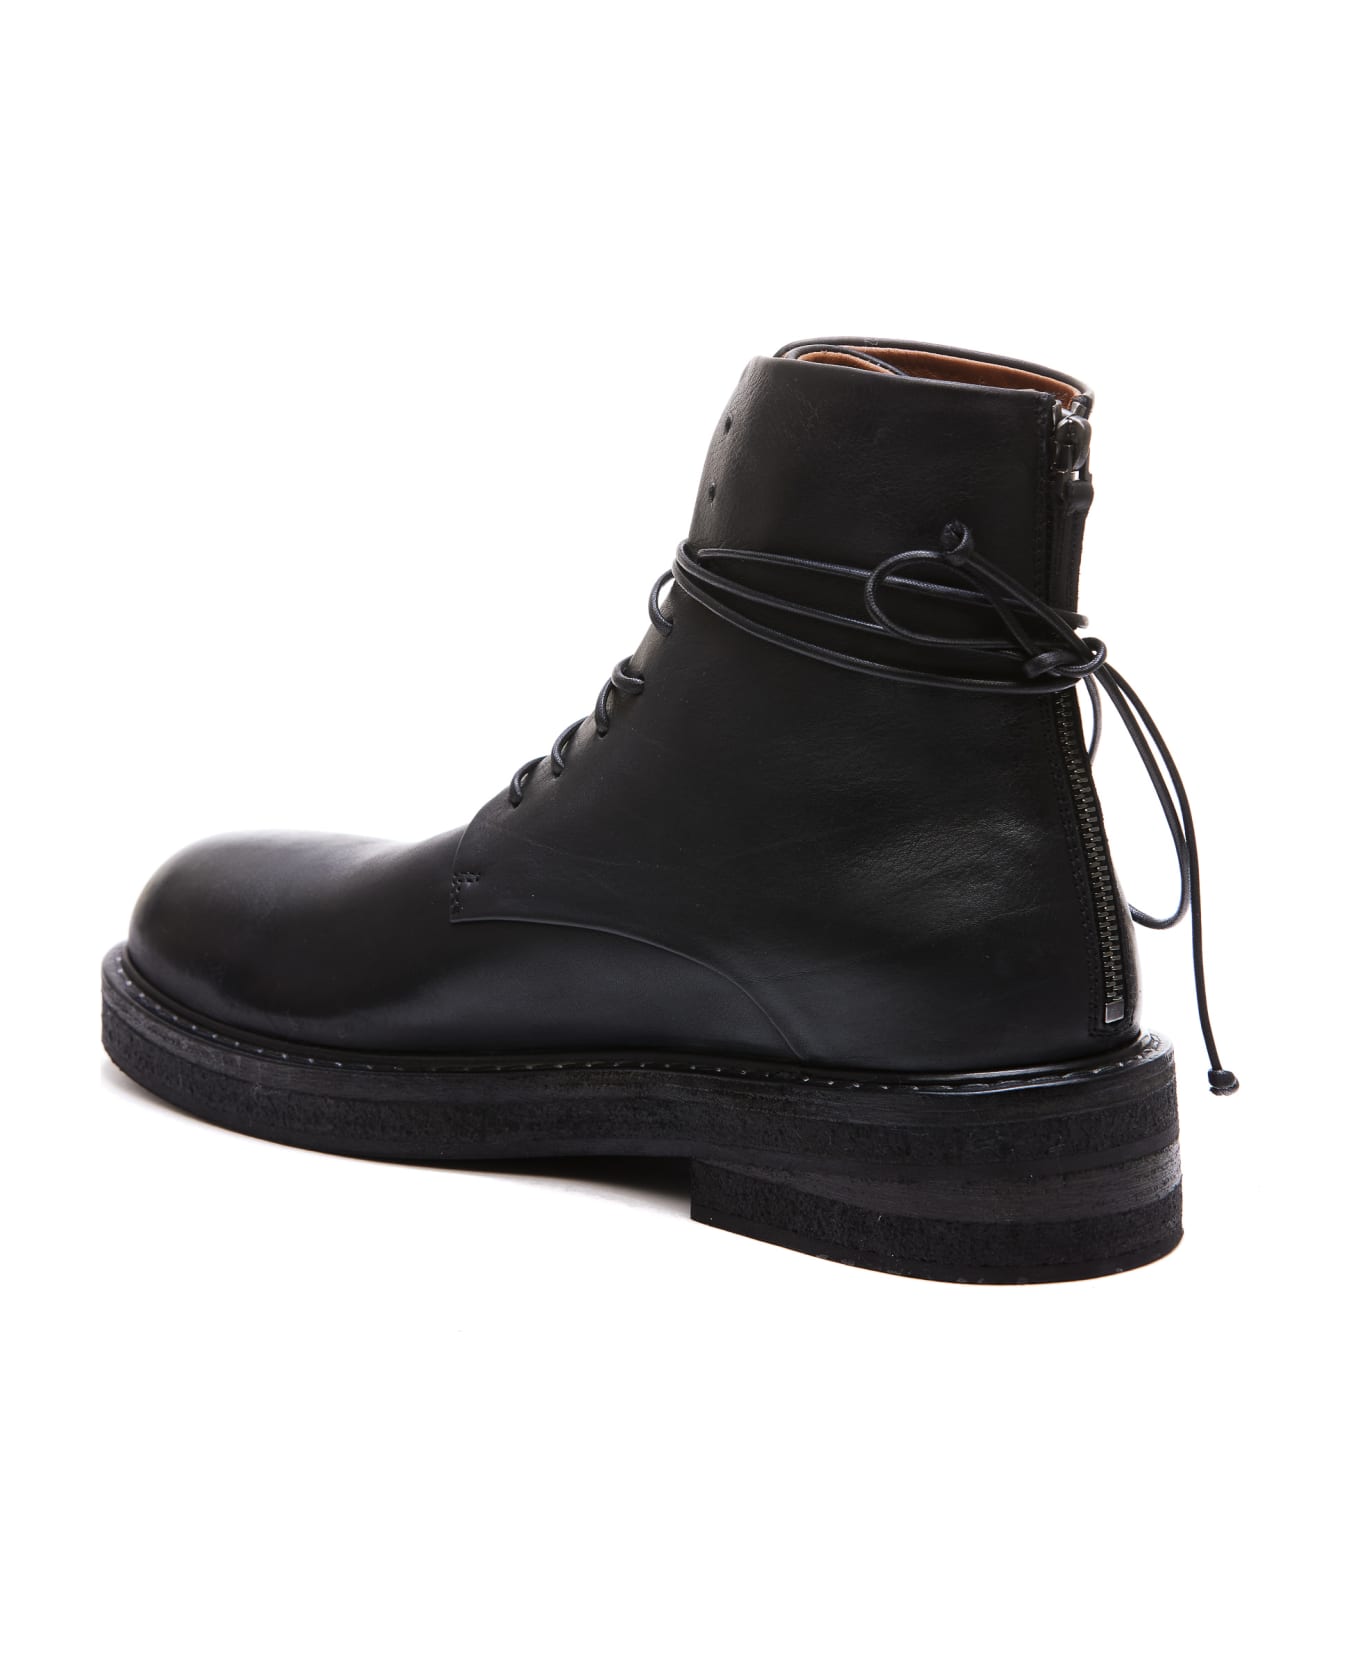 Marsell Parrucca Booties - Black